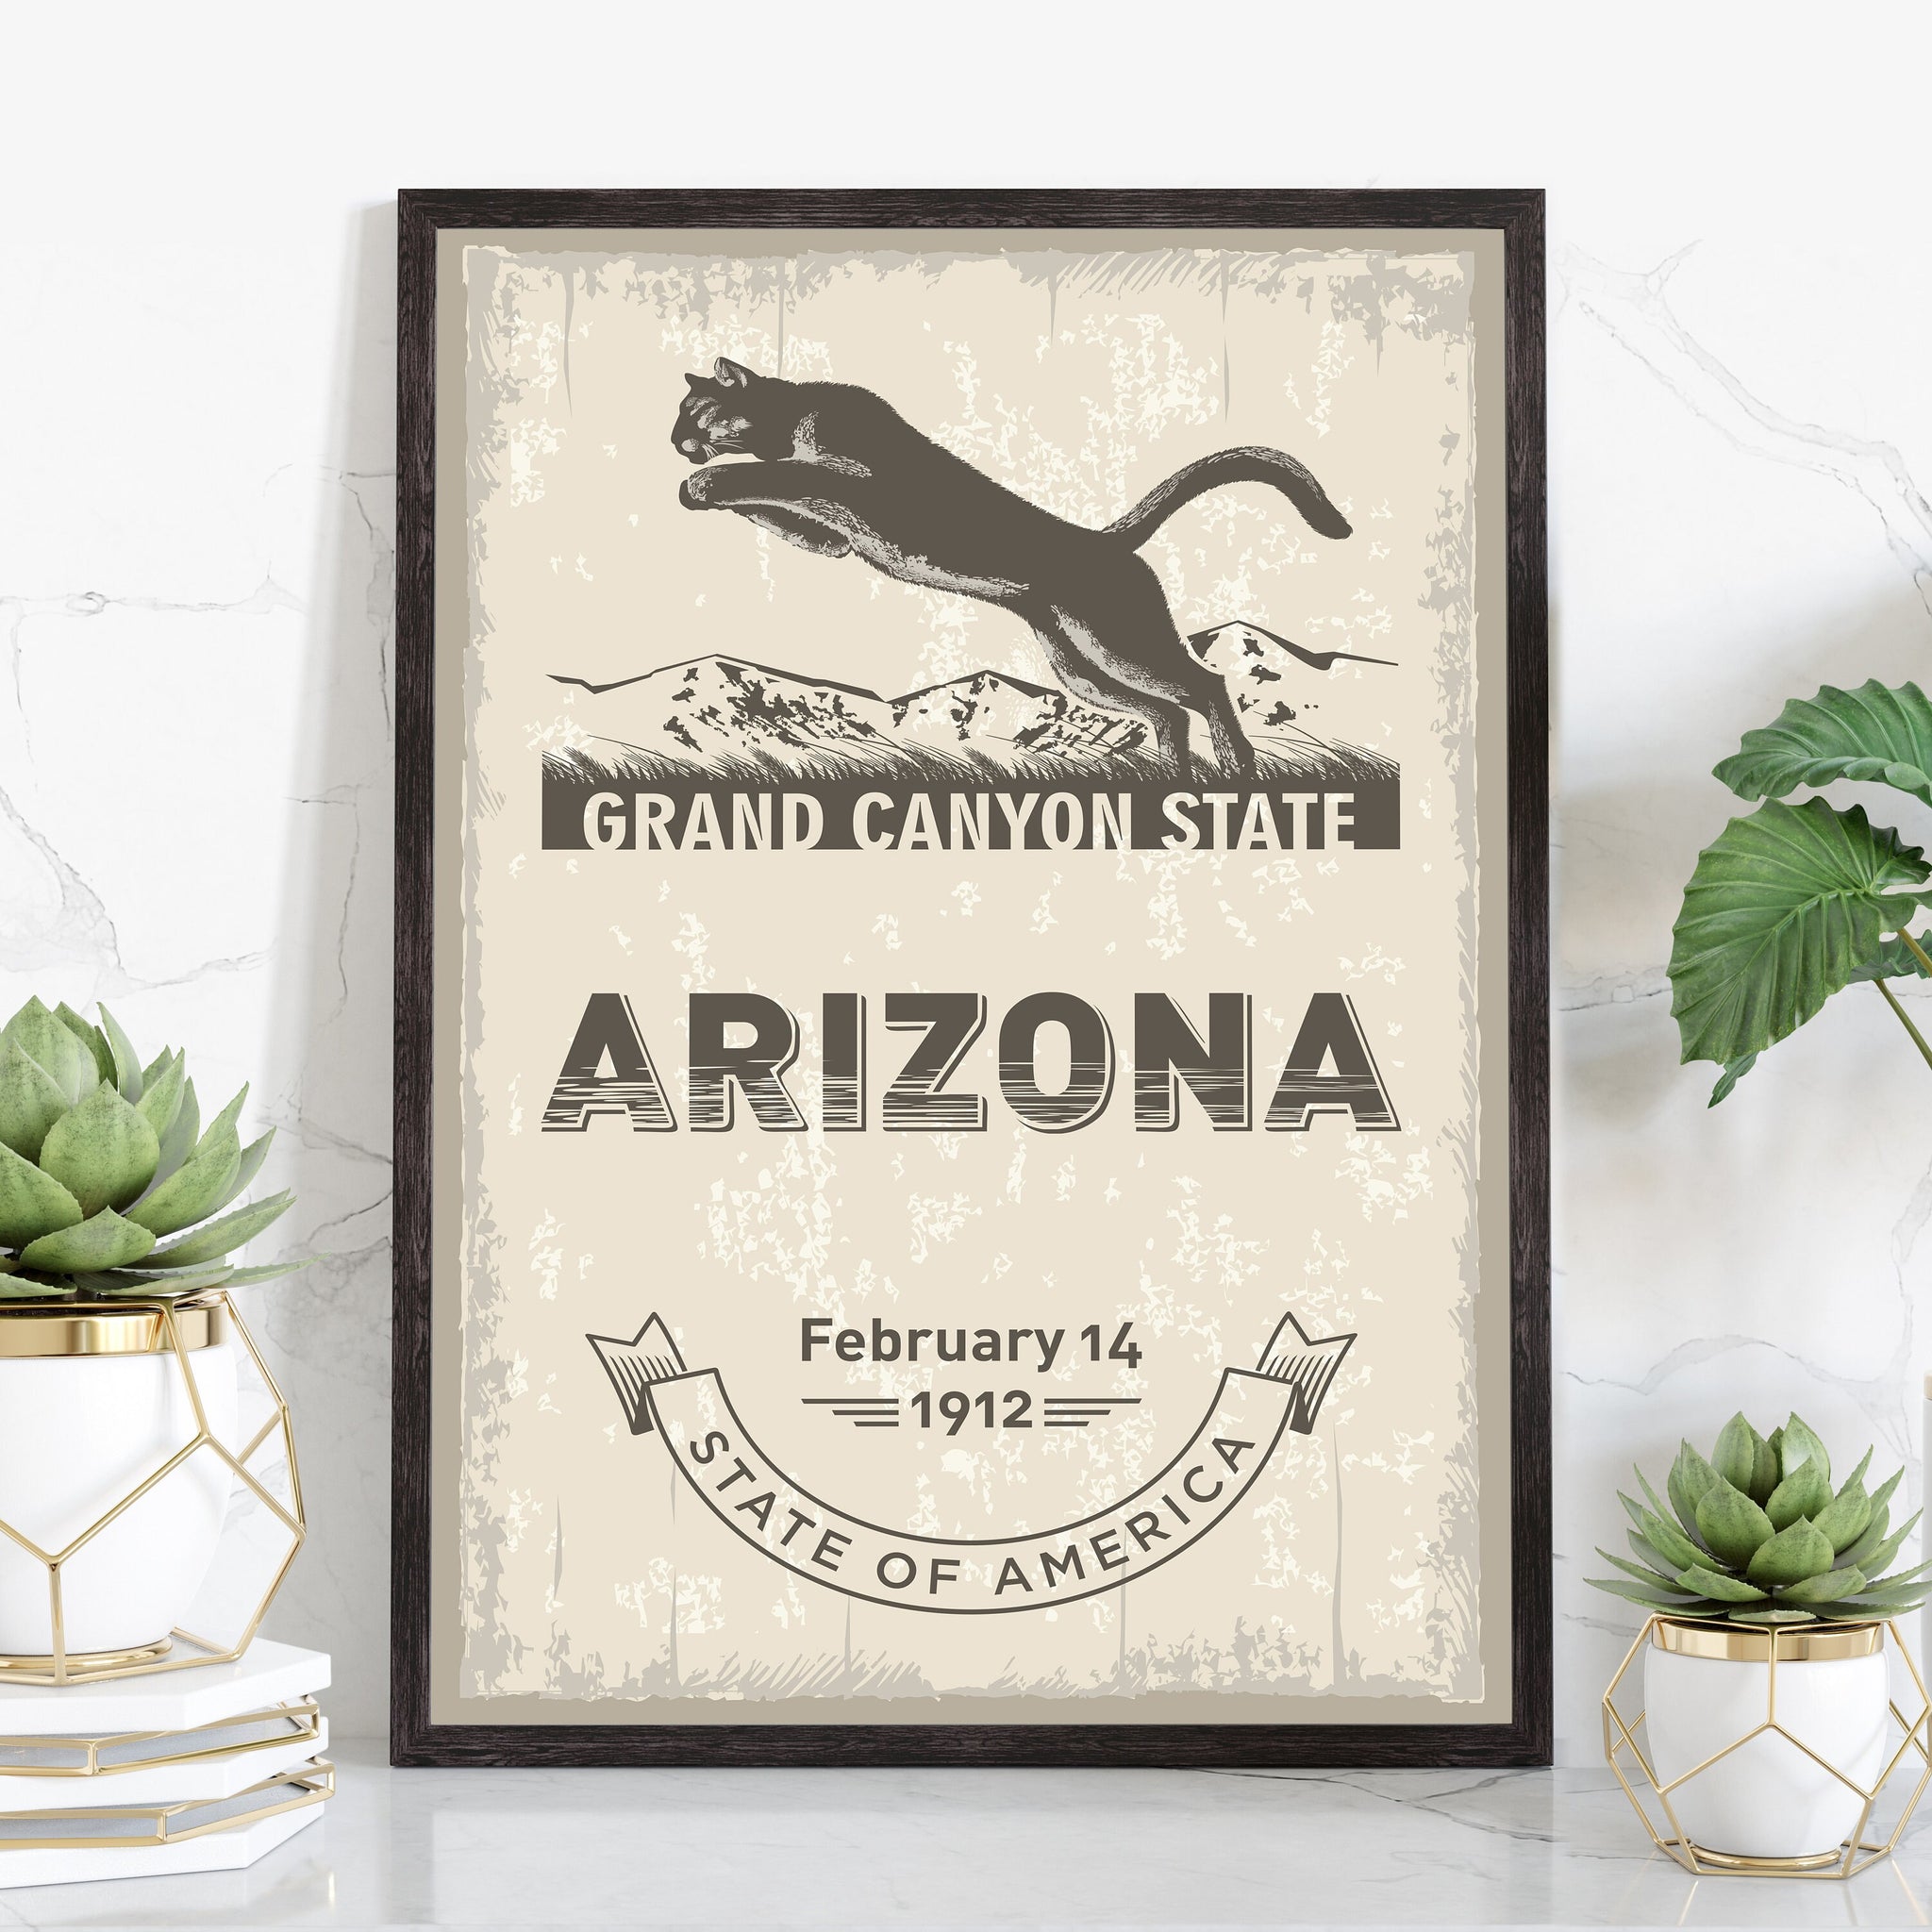 Arizona State Symbol Poster, Arizona State Poster Print, Arizona State Emblem Poster, Retro Travel State Poster, Home and Office Wall Art